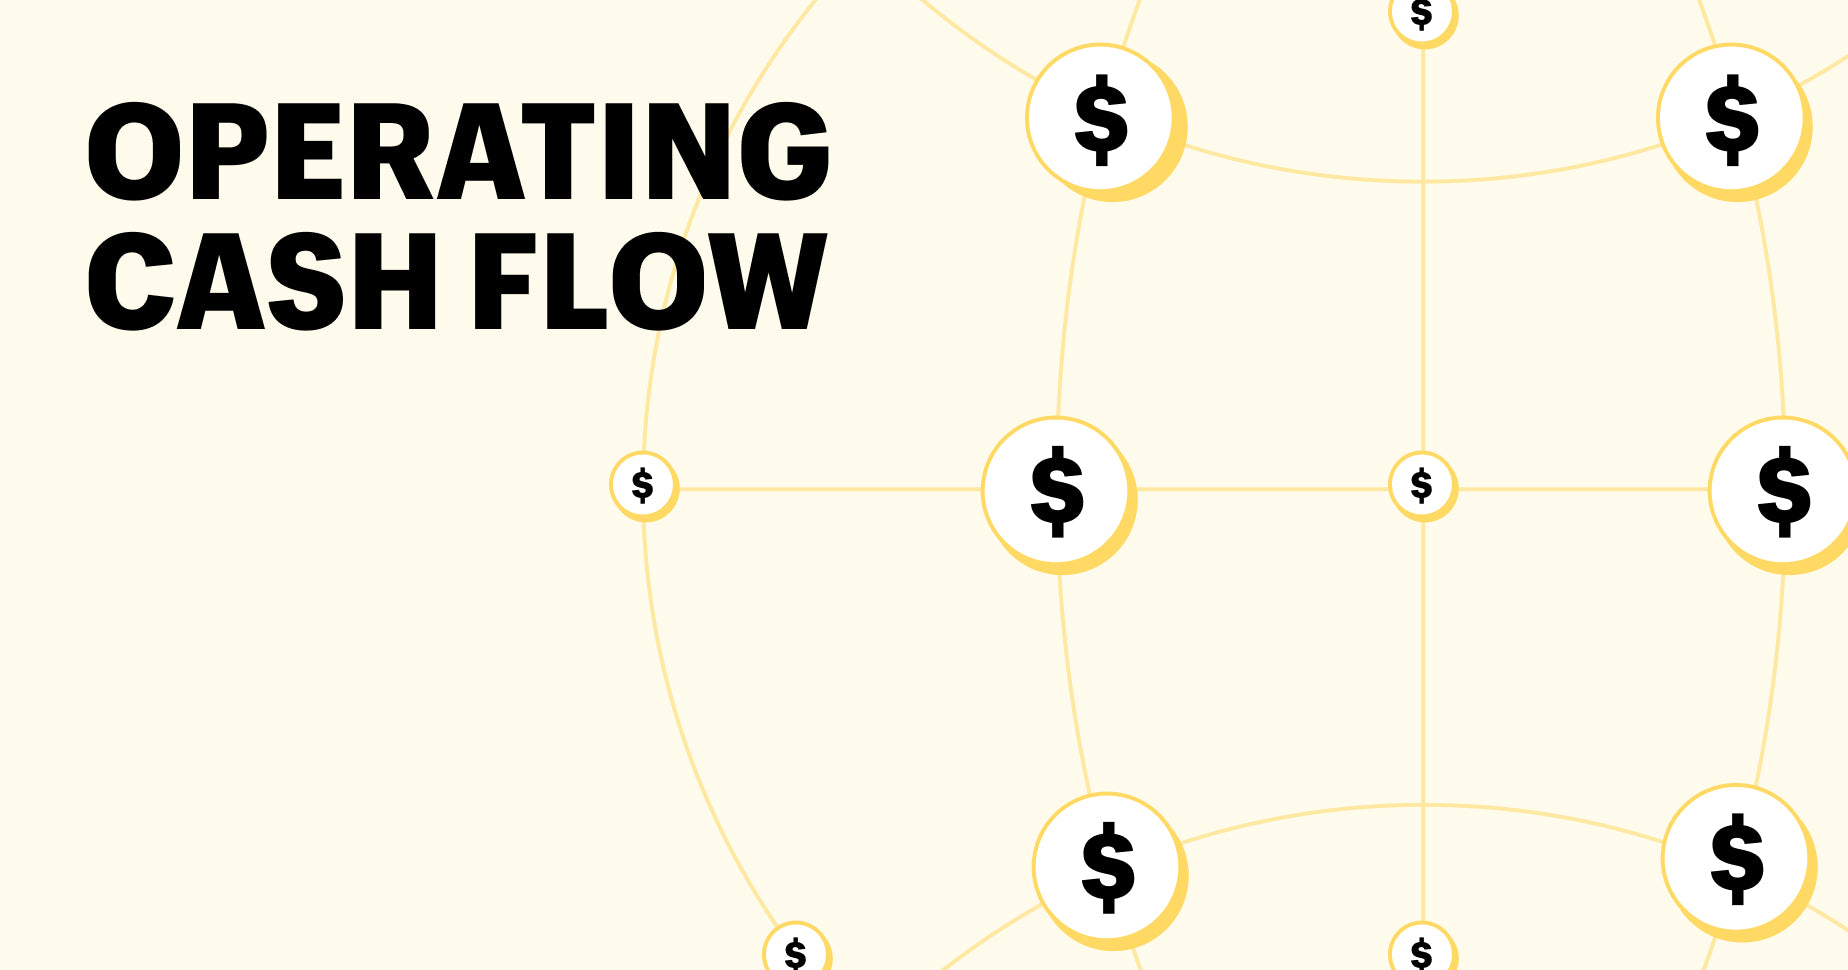 operating cash flow text on left, right is a globe with $ icons on it